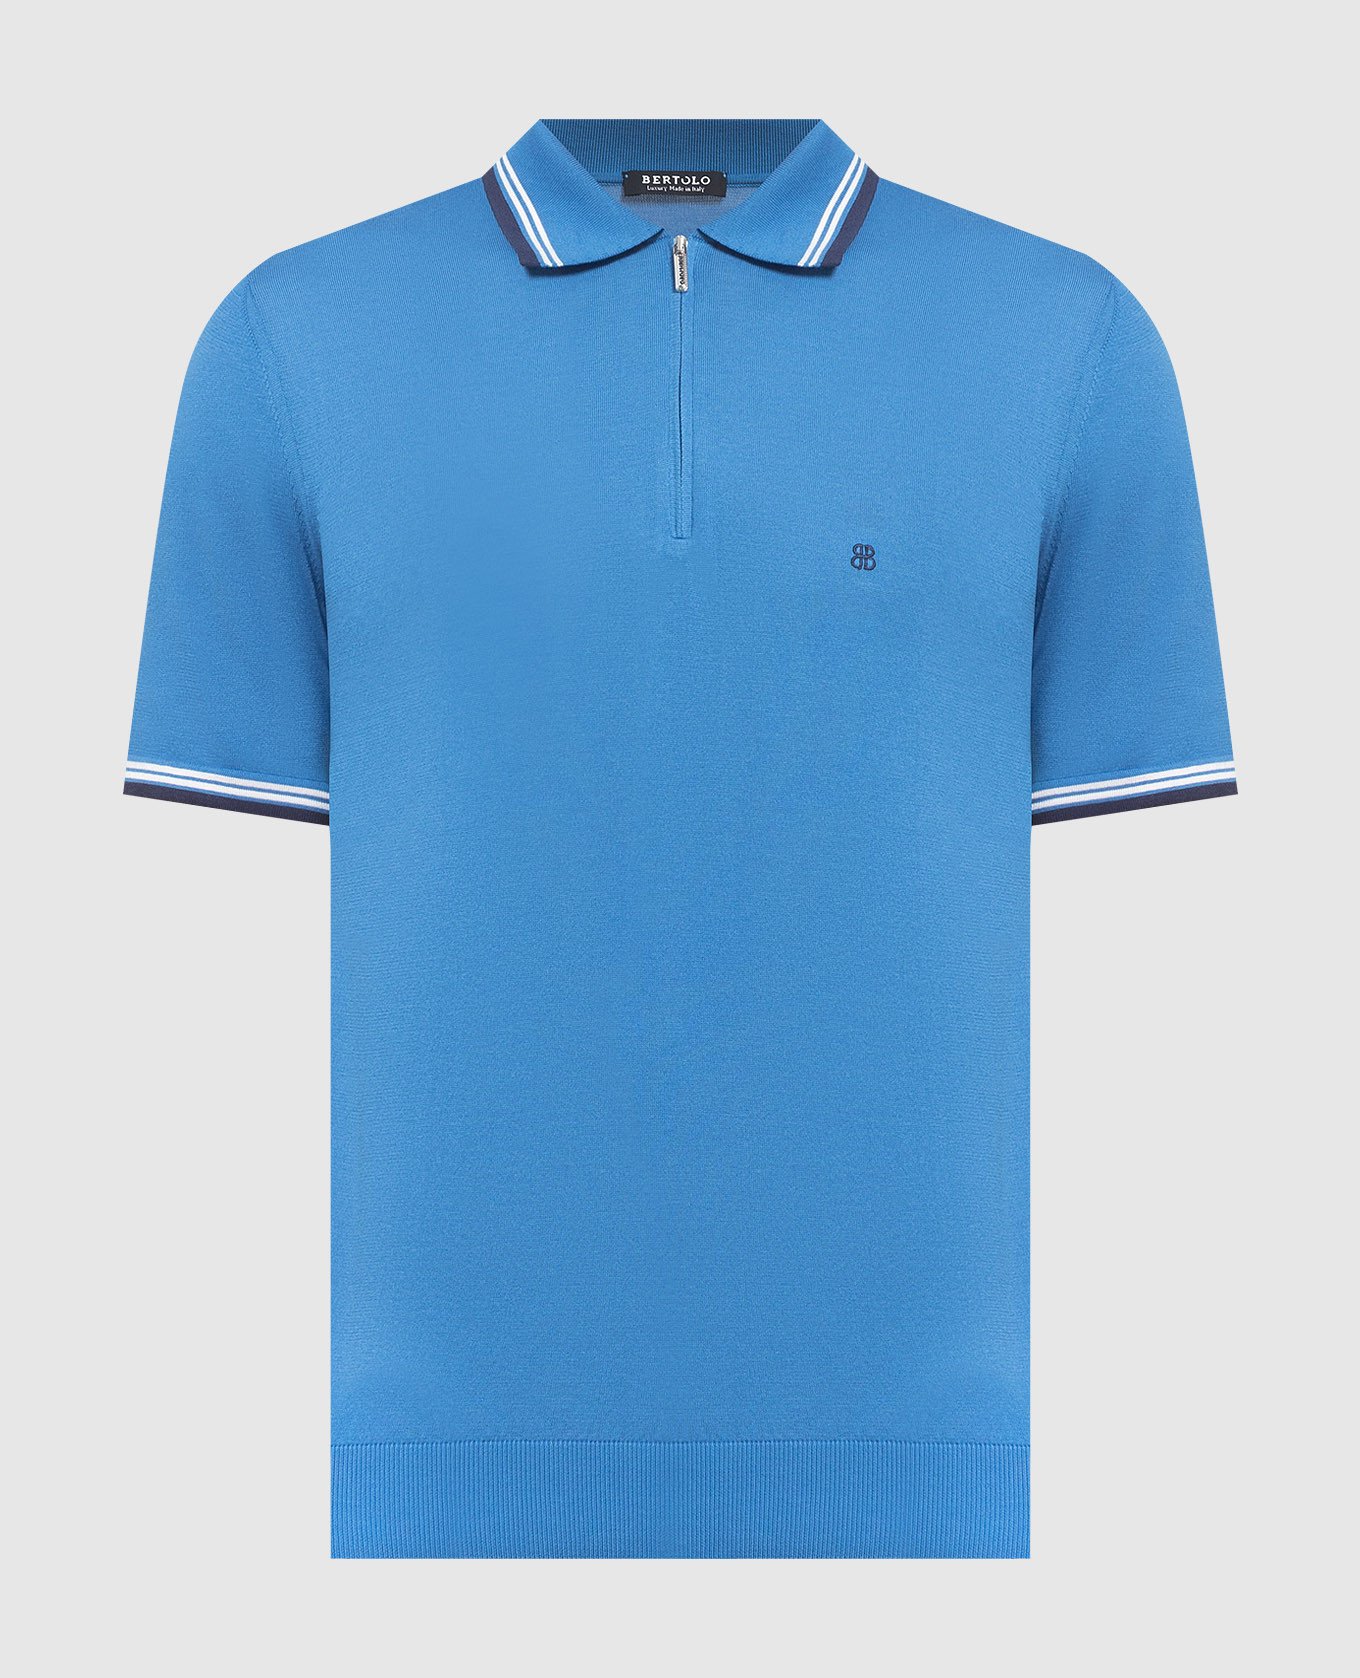 Bertolo Cashmere - Blue polo with logo embroidery 902176002037 - buy with  Czech Republic delivery at Symbol